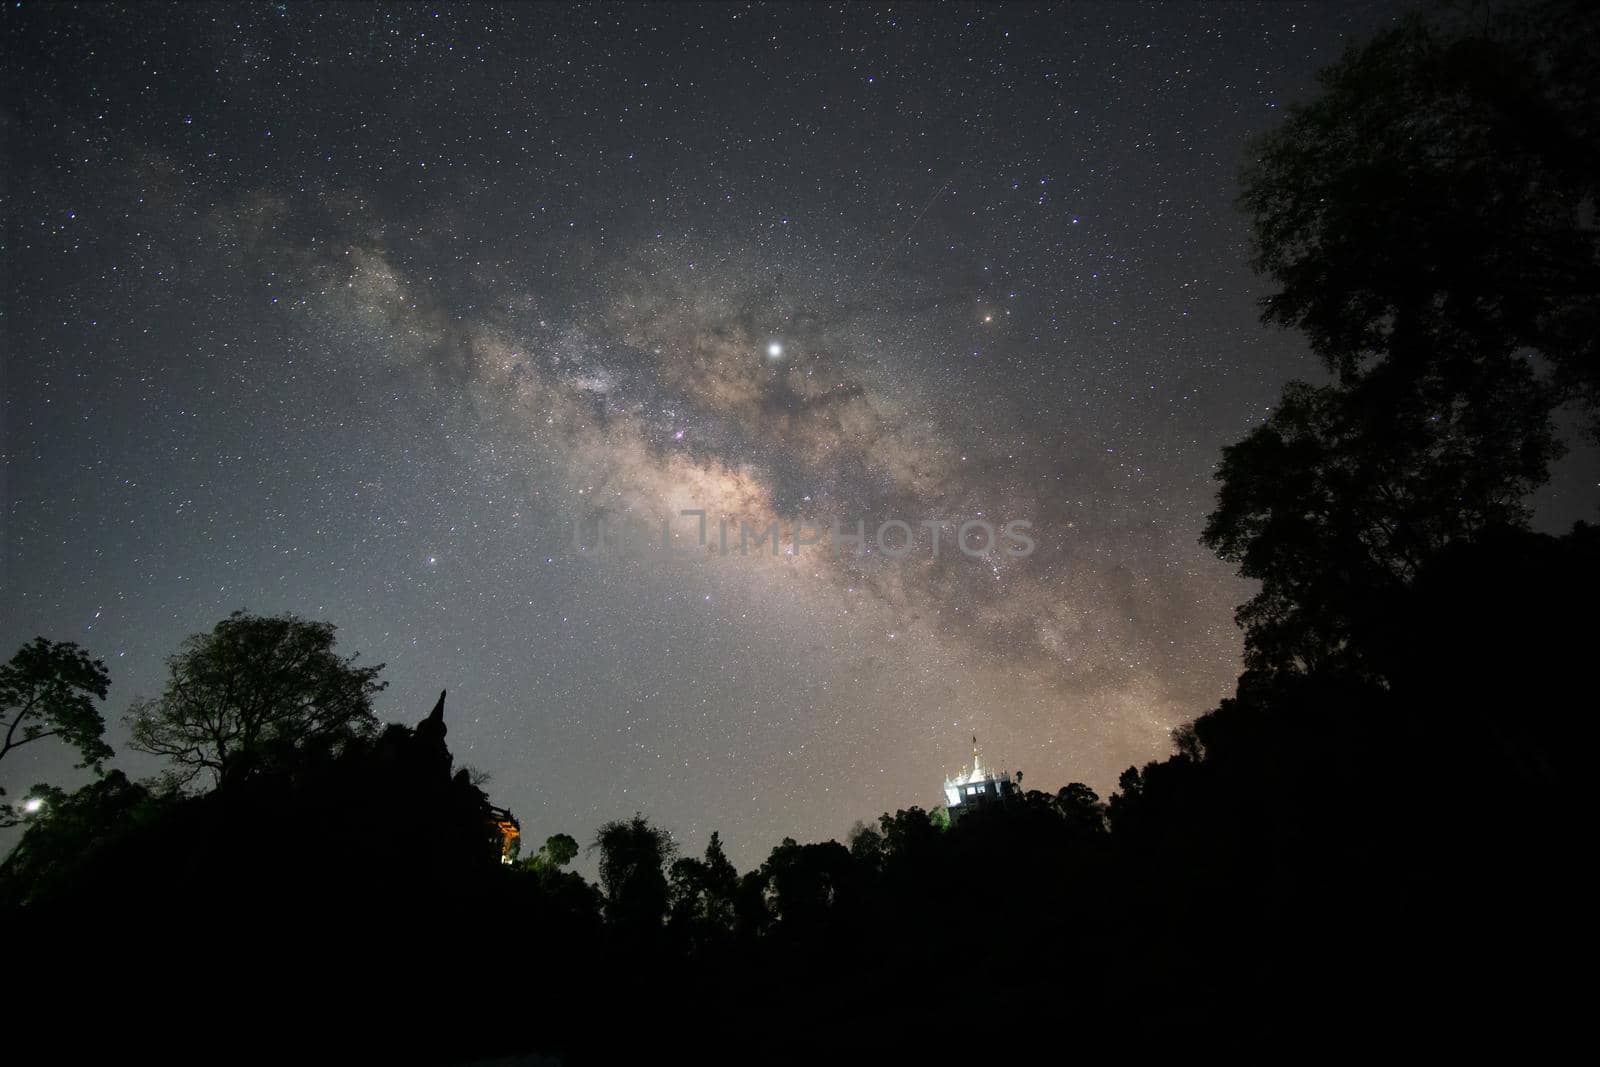 The Milky Way above the tree shadow on the top of the mountain